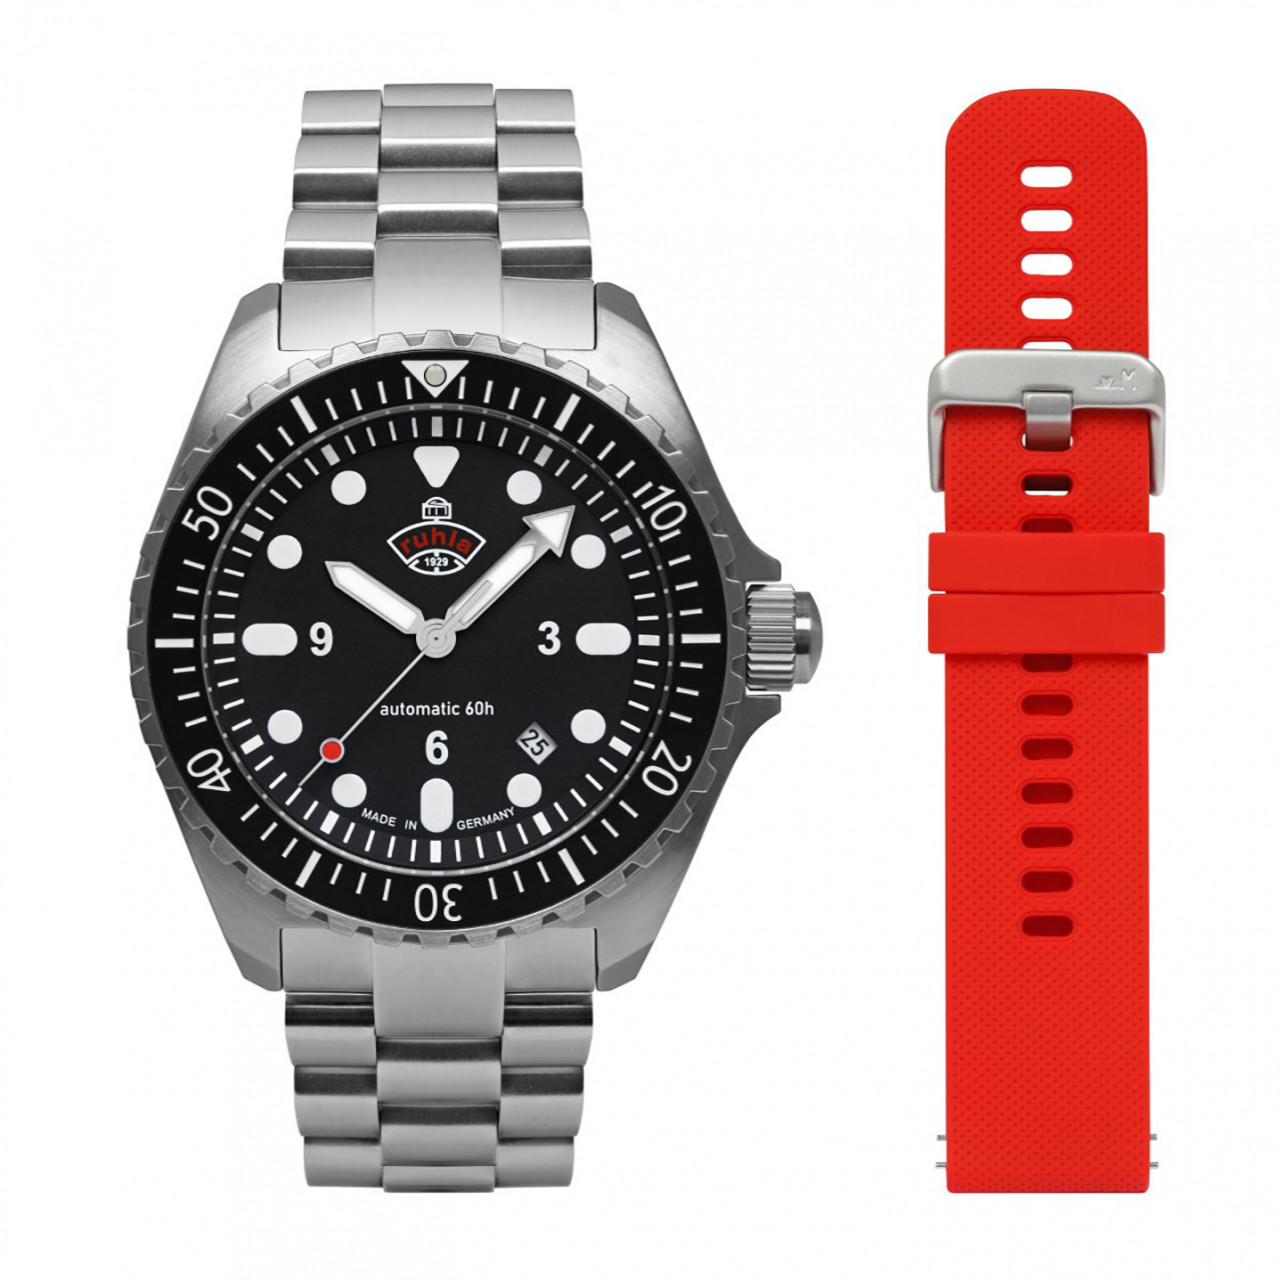 HAU, Ruhla 1929 Minentaucher DIVER Cal. 8315 Set MB+SB red 21 jewels, PR 60h, Steelcase water resistant 10atm, Sapphire crystal